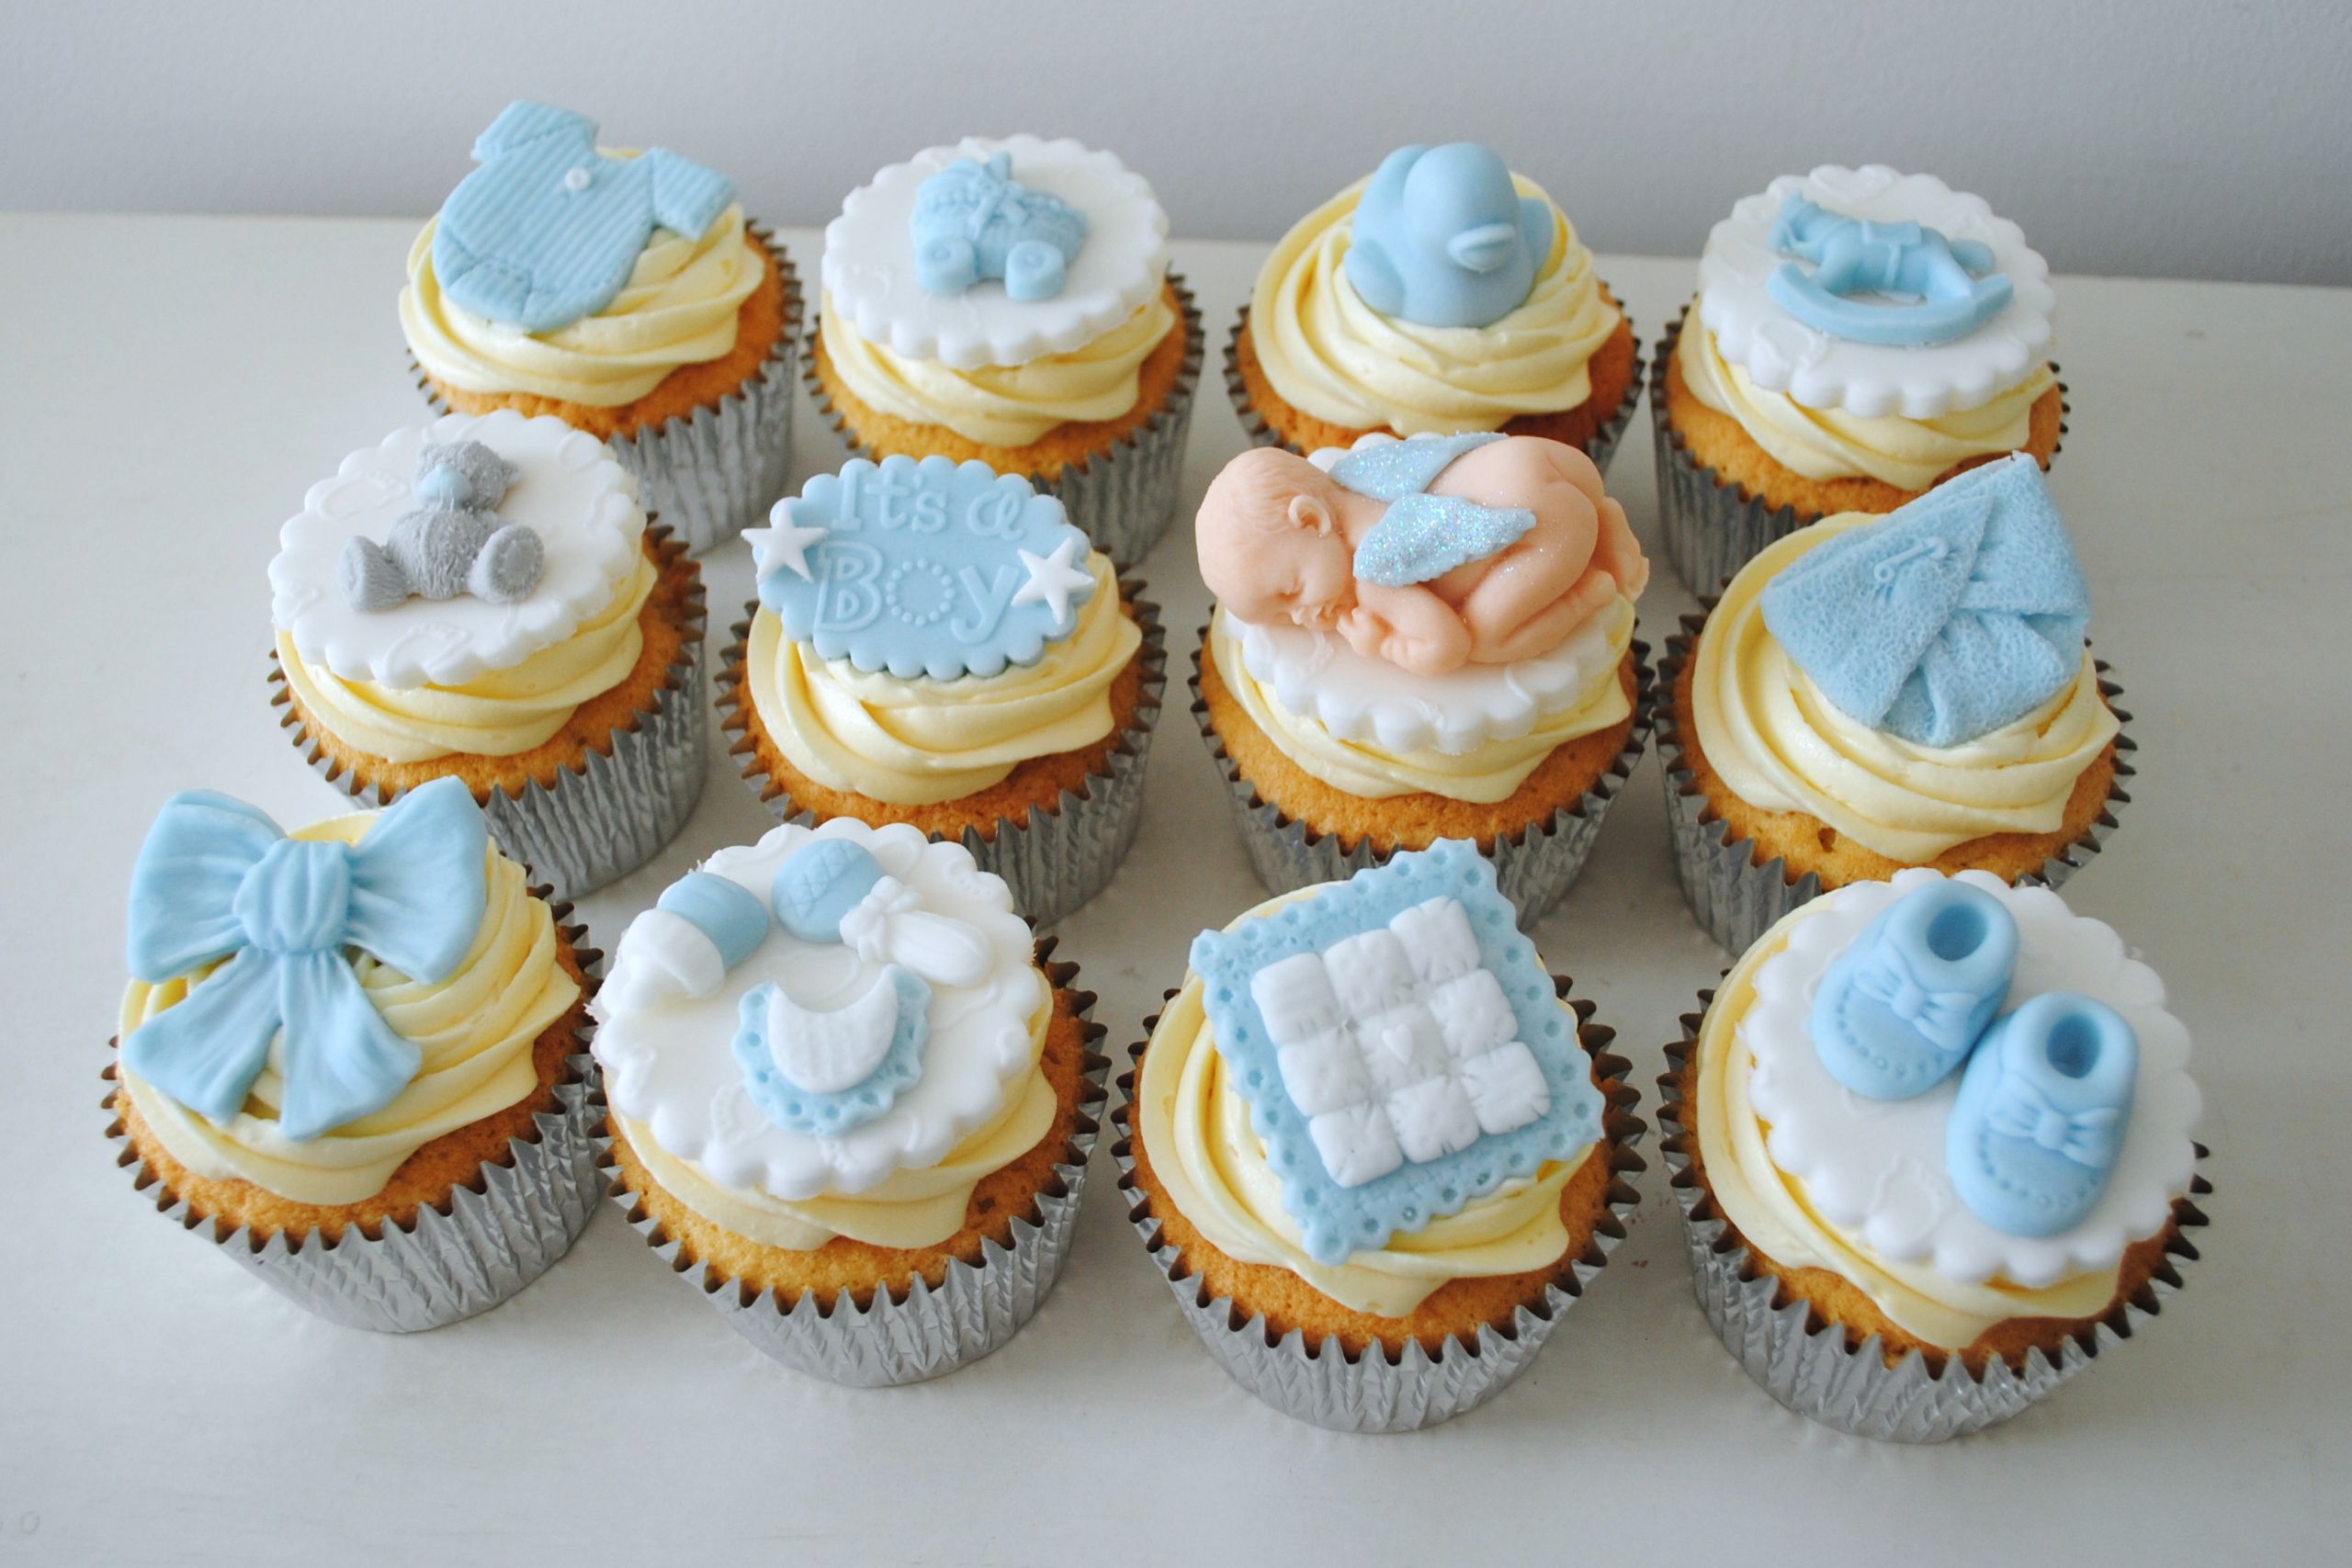 Cupcakes For Baby Shower
 Miss Cupcakes Blog Archive Boy Baby Shower cupcakes 12